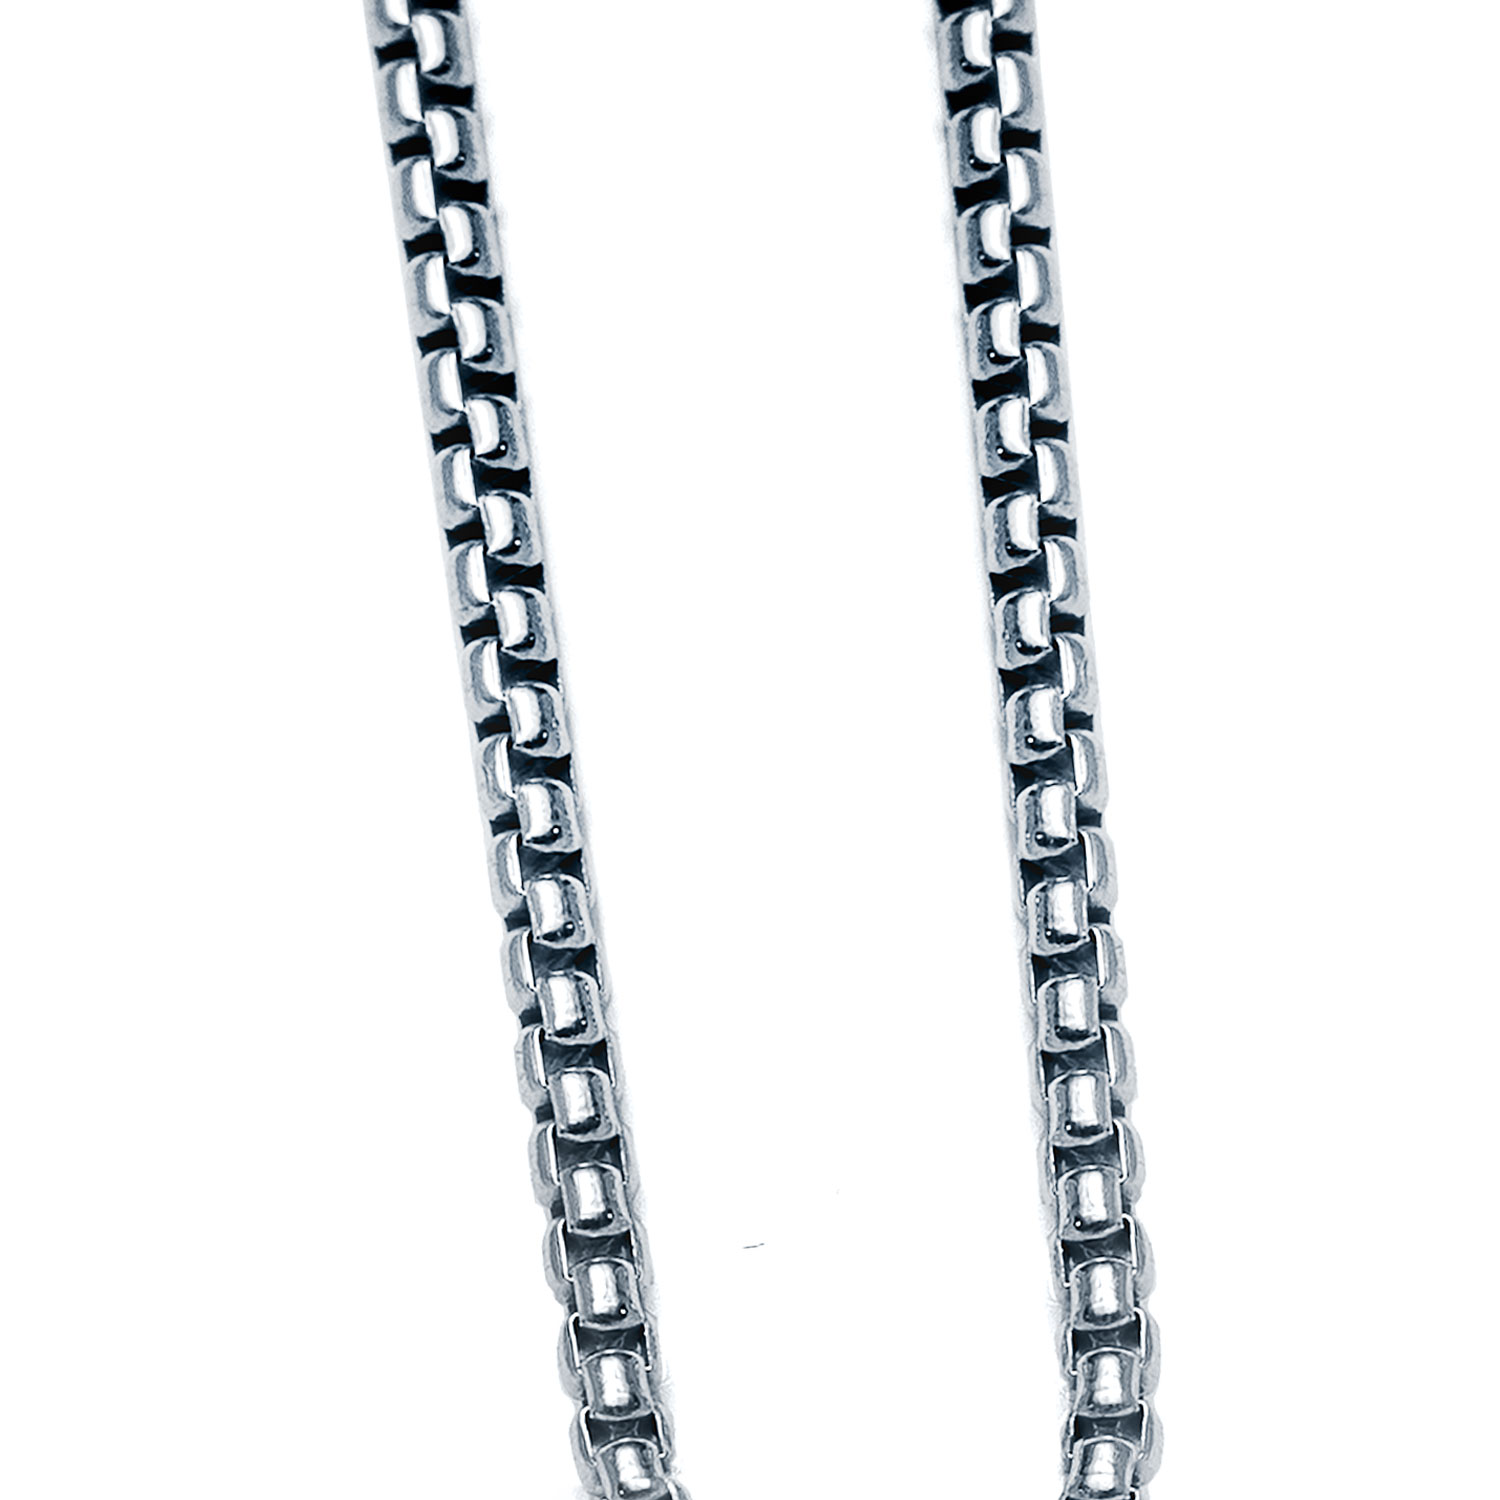 Sterling Silver Necklace Chain, Blank Chain Link Replacement Necklace 